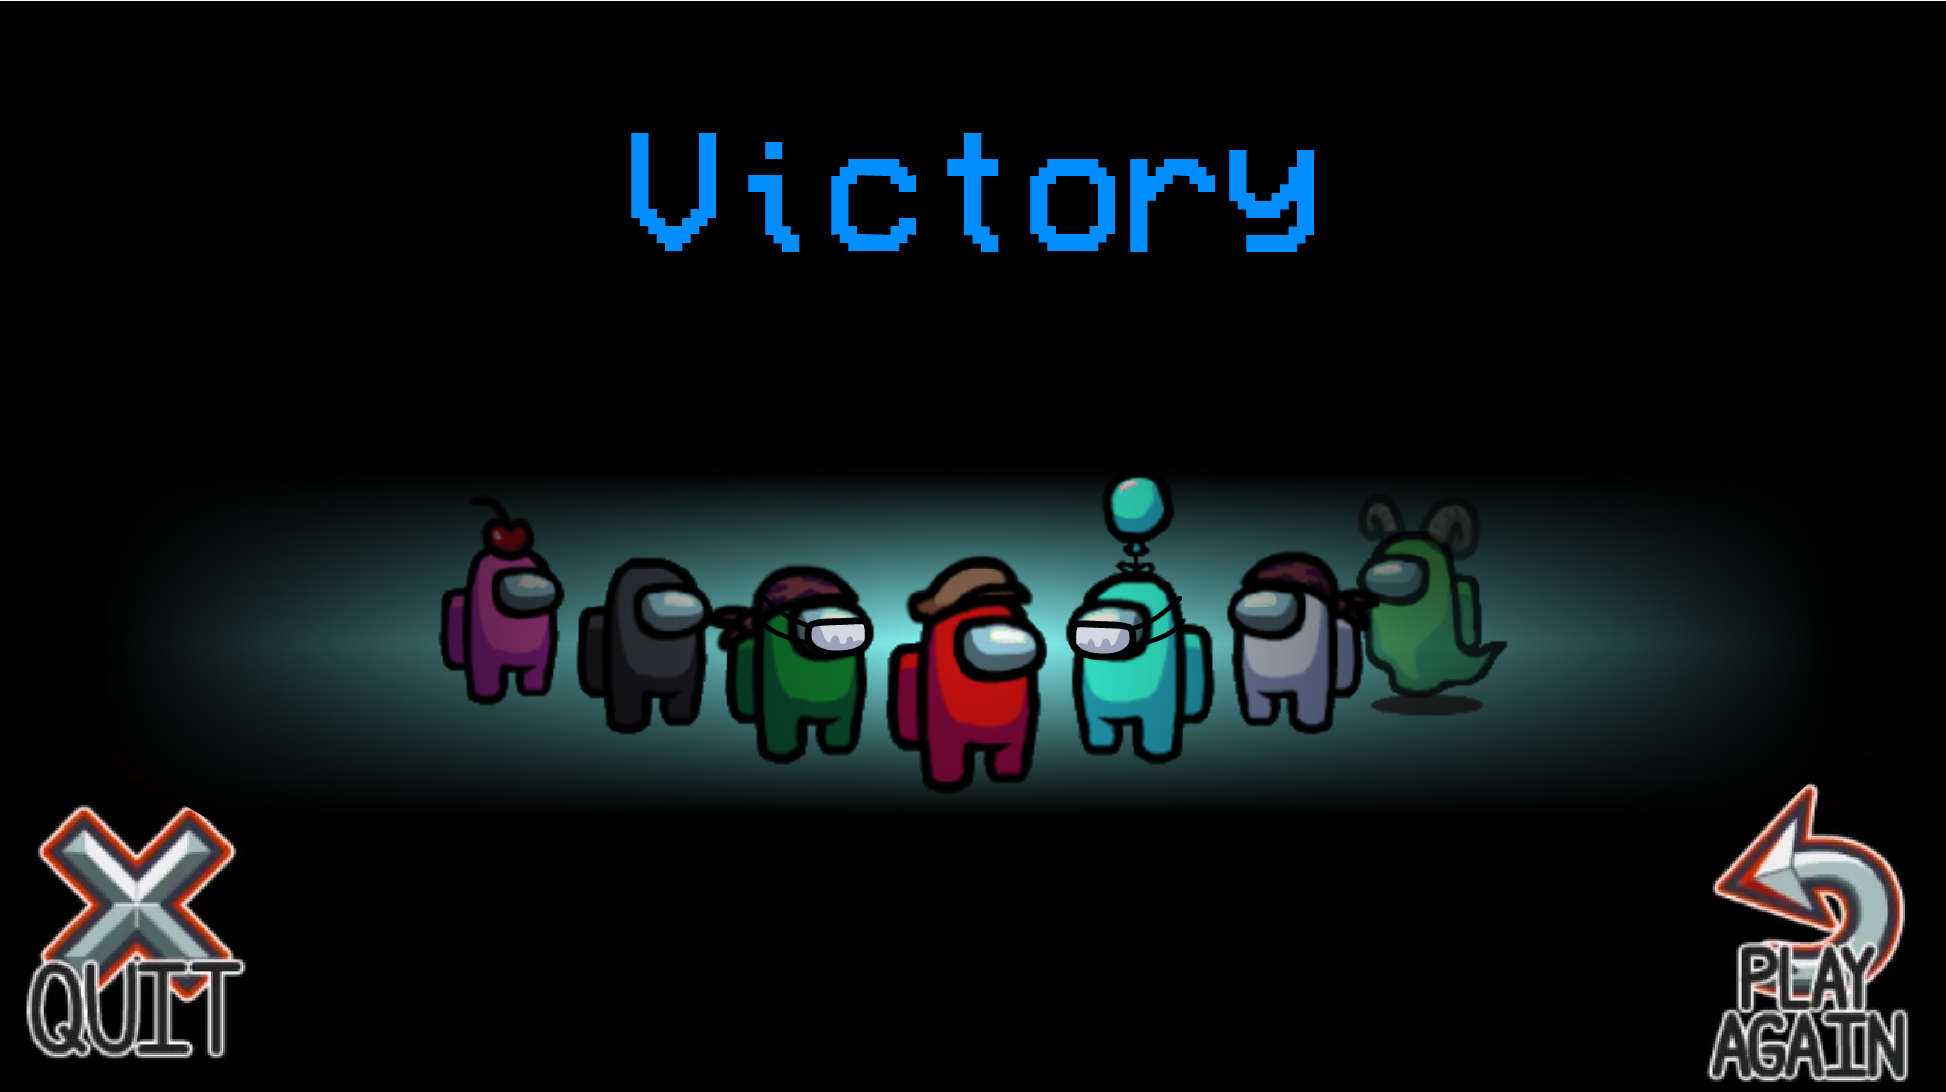 Victory gameplay screen from Among Us